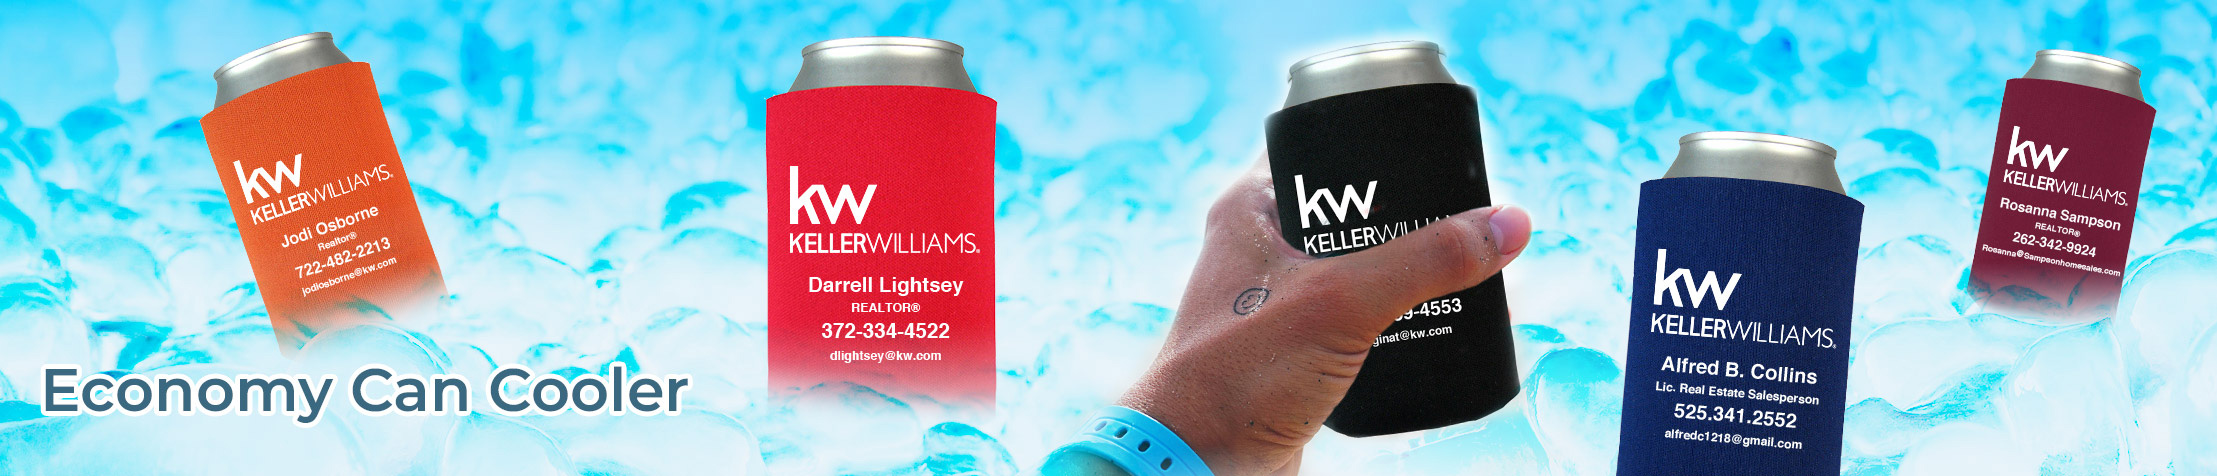 Keller Williams Real Estate Economy Can Cooler - KW approved vendor personalized realtor promotional products | BestPrintBuy.com